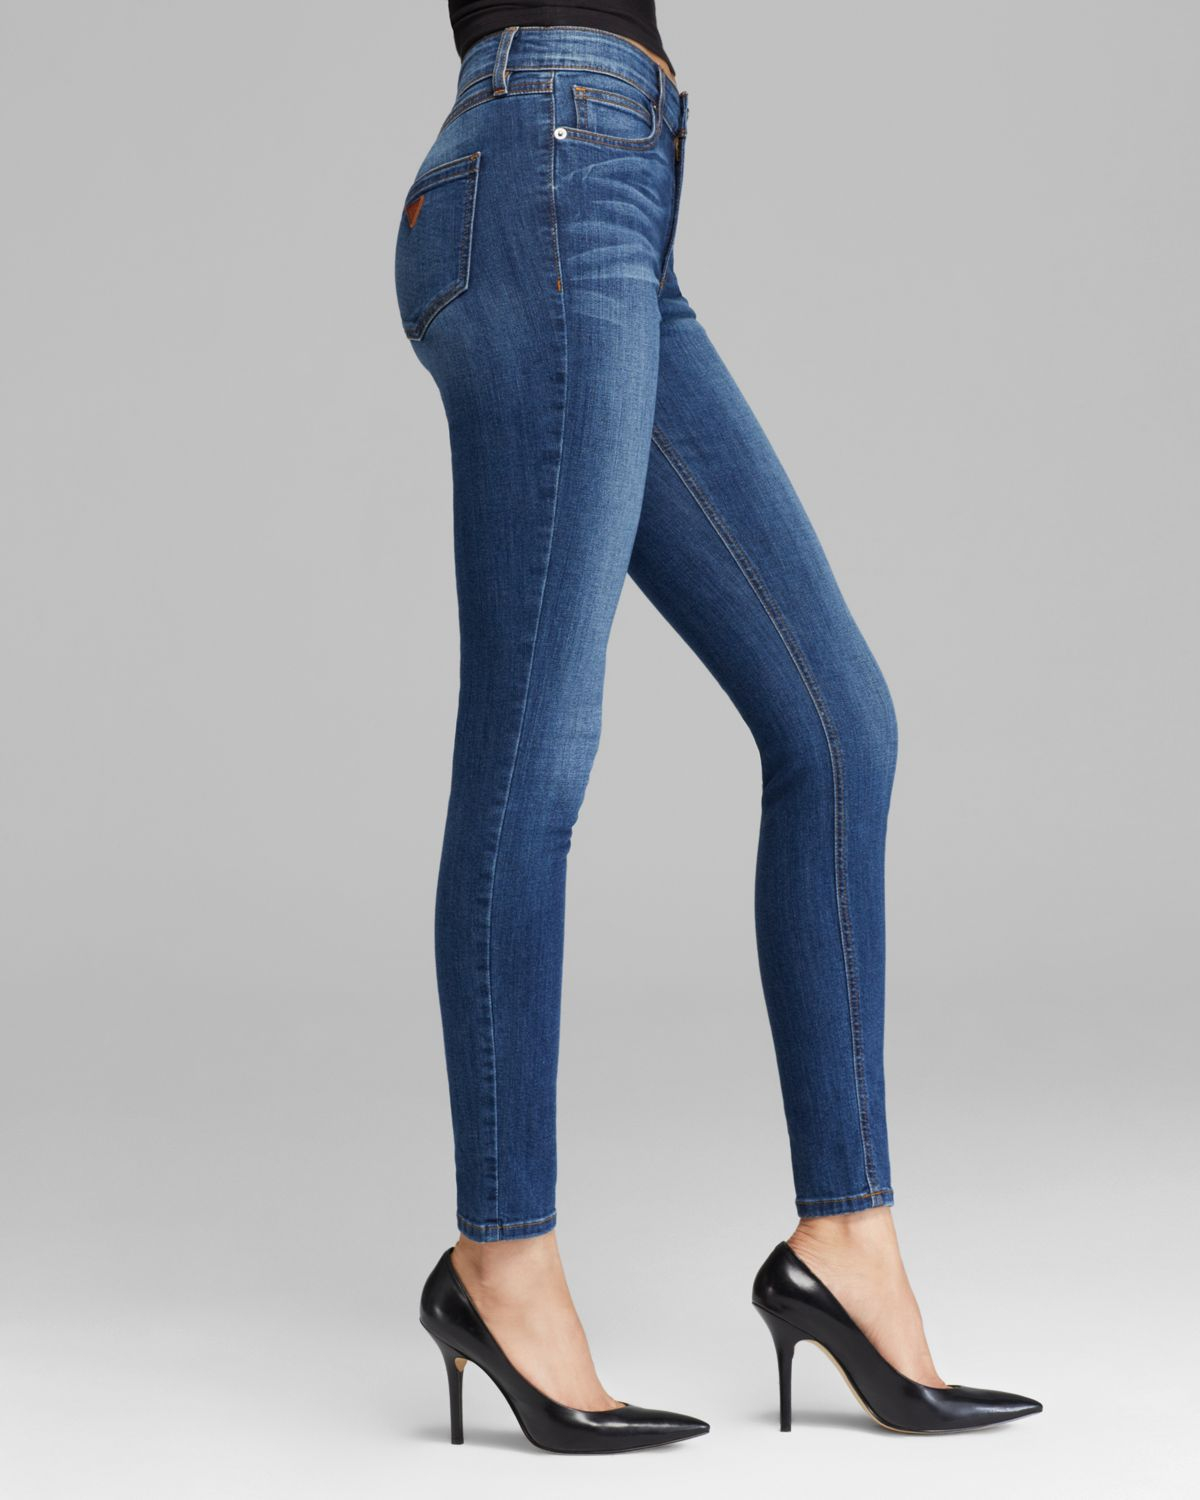 Guess Jeans High Waist Skinny in Lyon Wash in Blue | Lyst